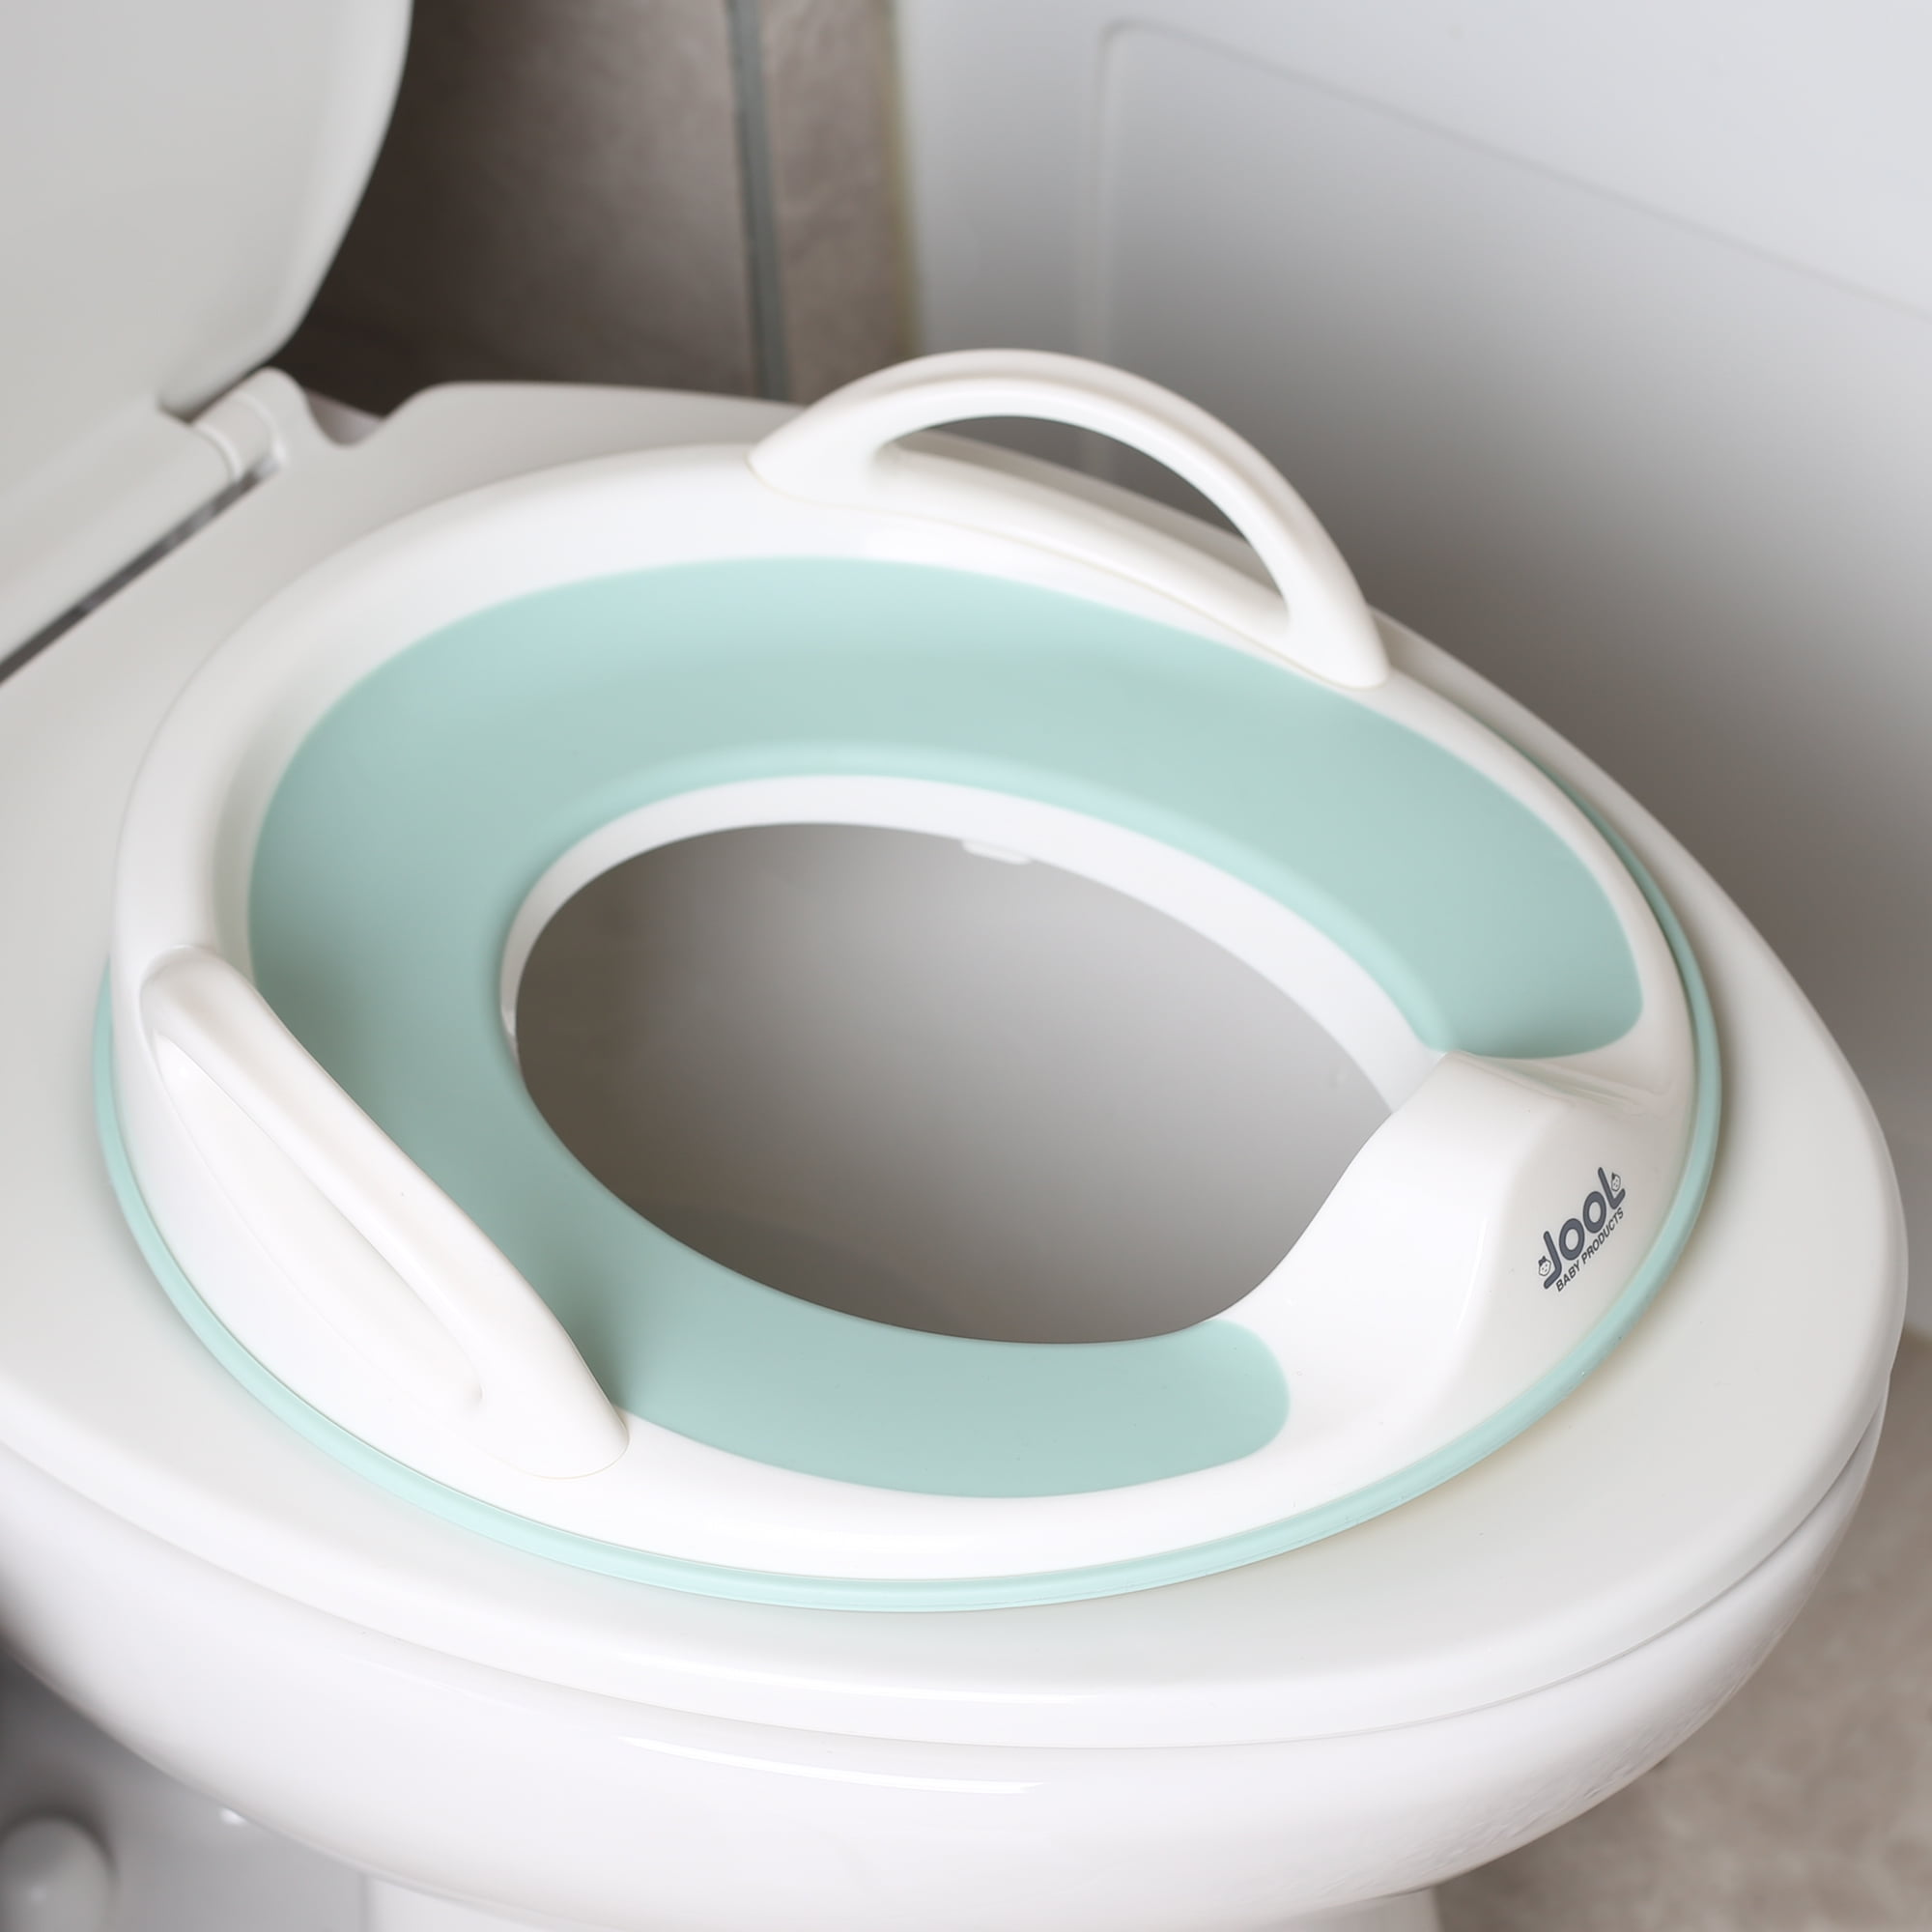 Fits Round /& Oval Toilets Jool Baby Jool Baby Products Potty Training Seat for Boys and Girls Non-Slip with Splash Guard Includes Free Storage Hook